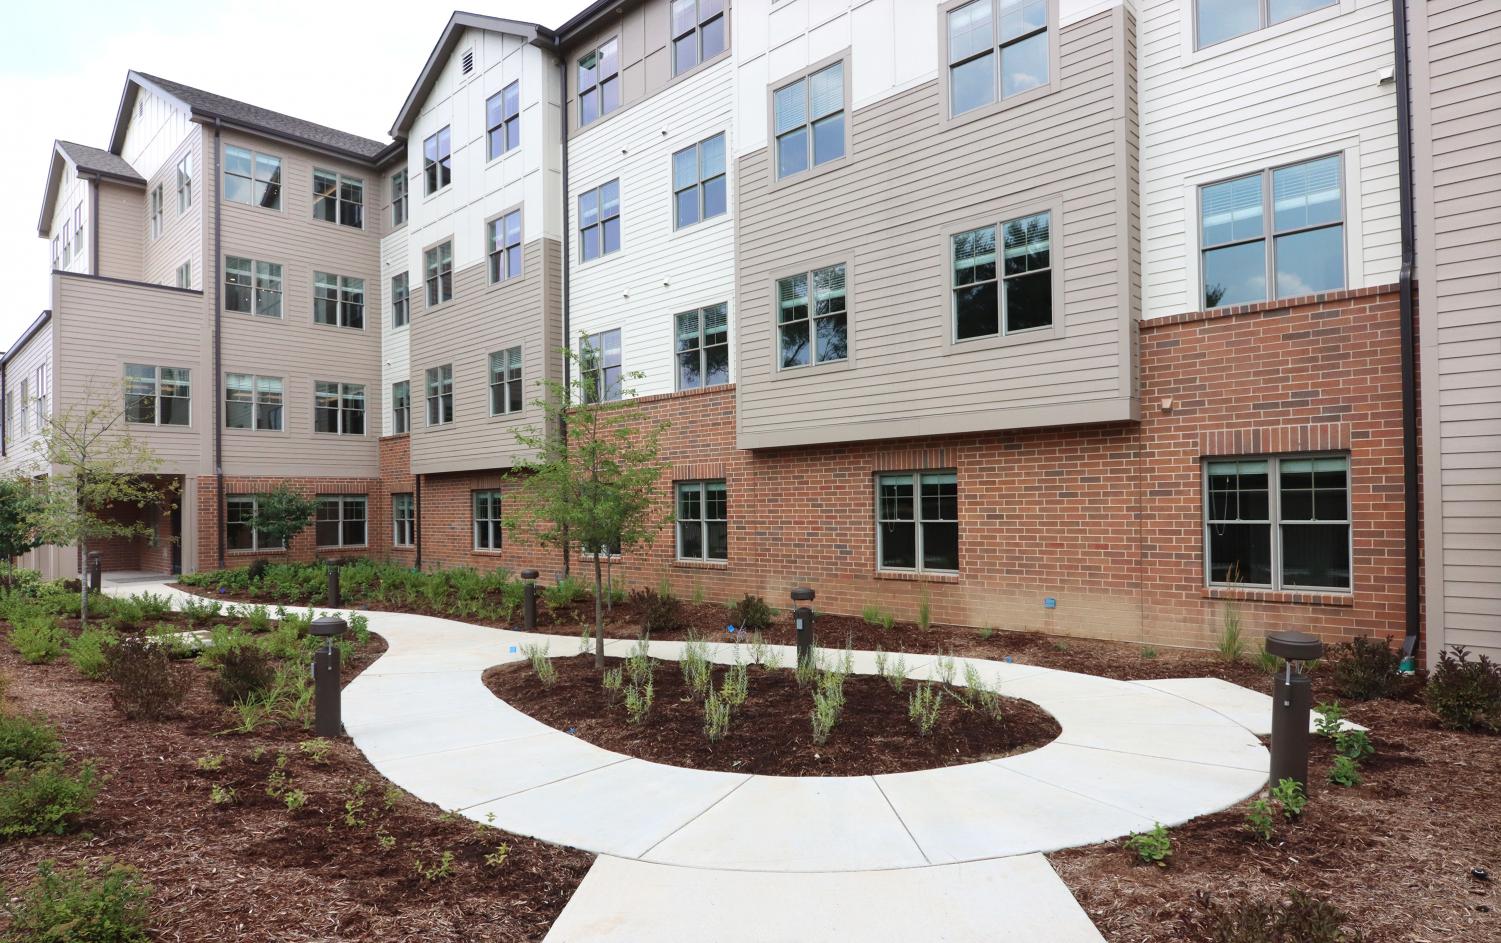 Exterior Courtyard Friendship Village Assisted Living July 2020 